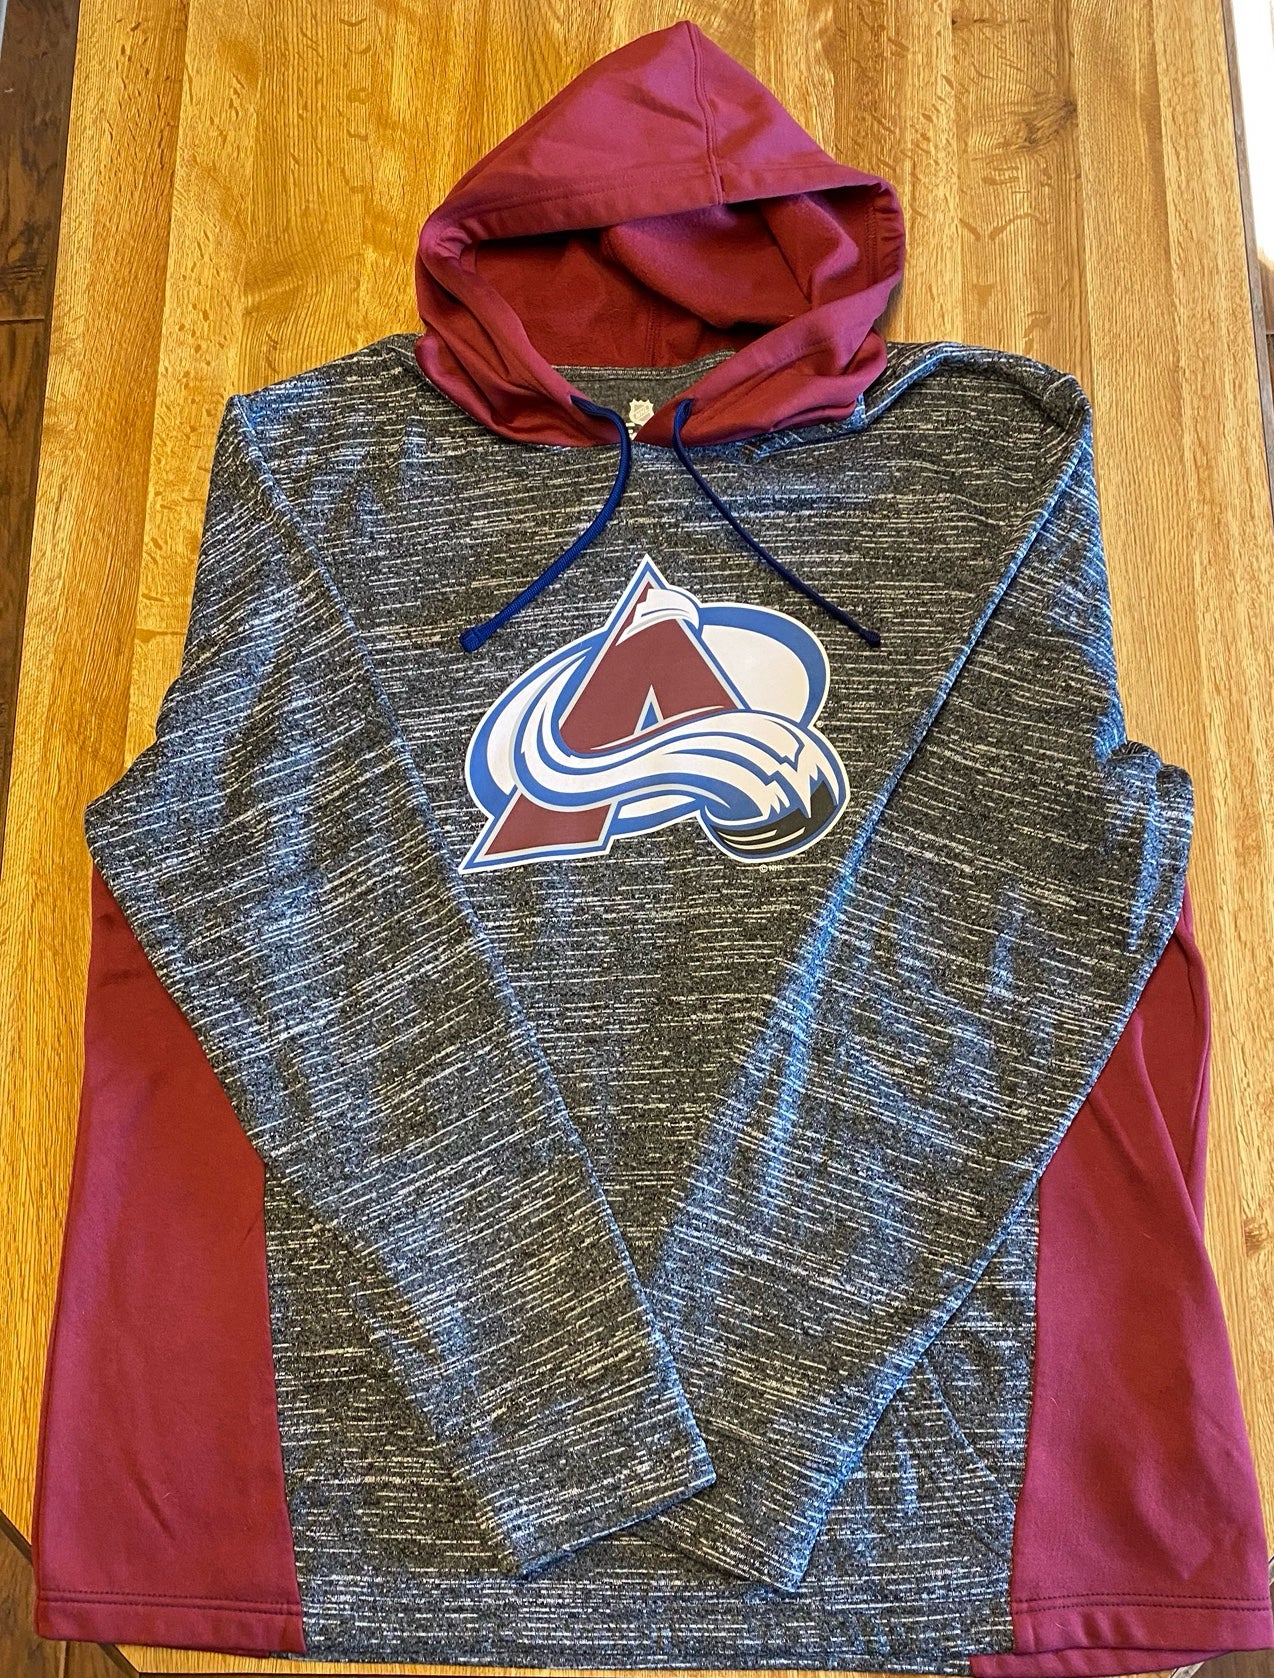 Fanatics Branded Men's Navy Colorado Avalanche Team Lockup Fitted Pullover Hoodie Size: Extra Large